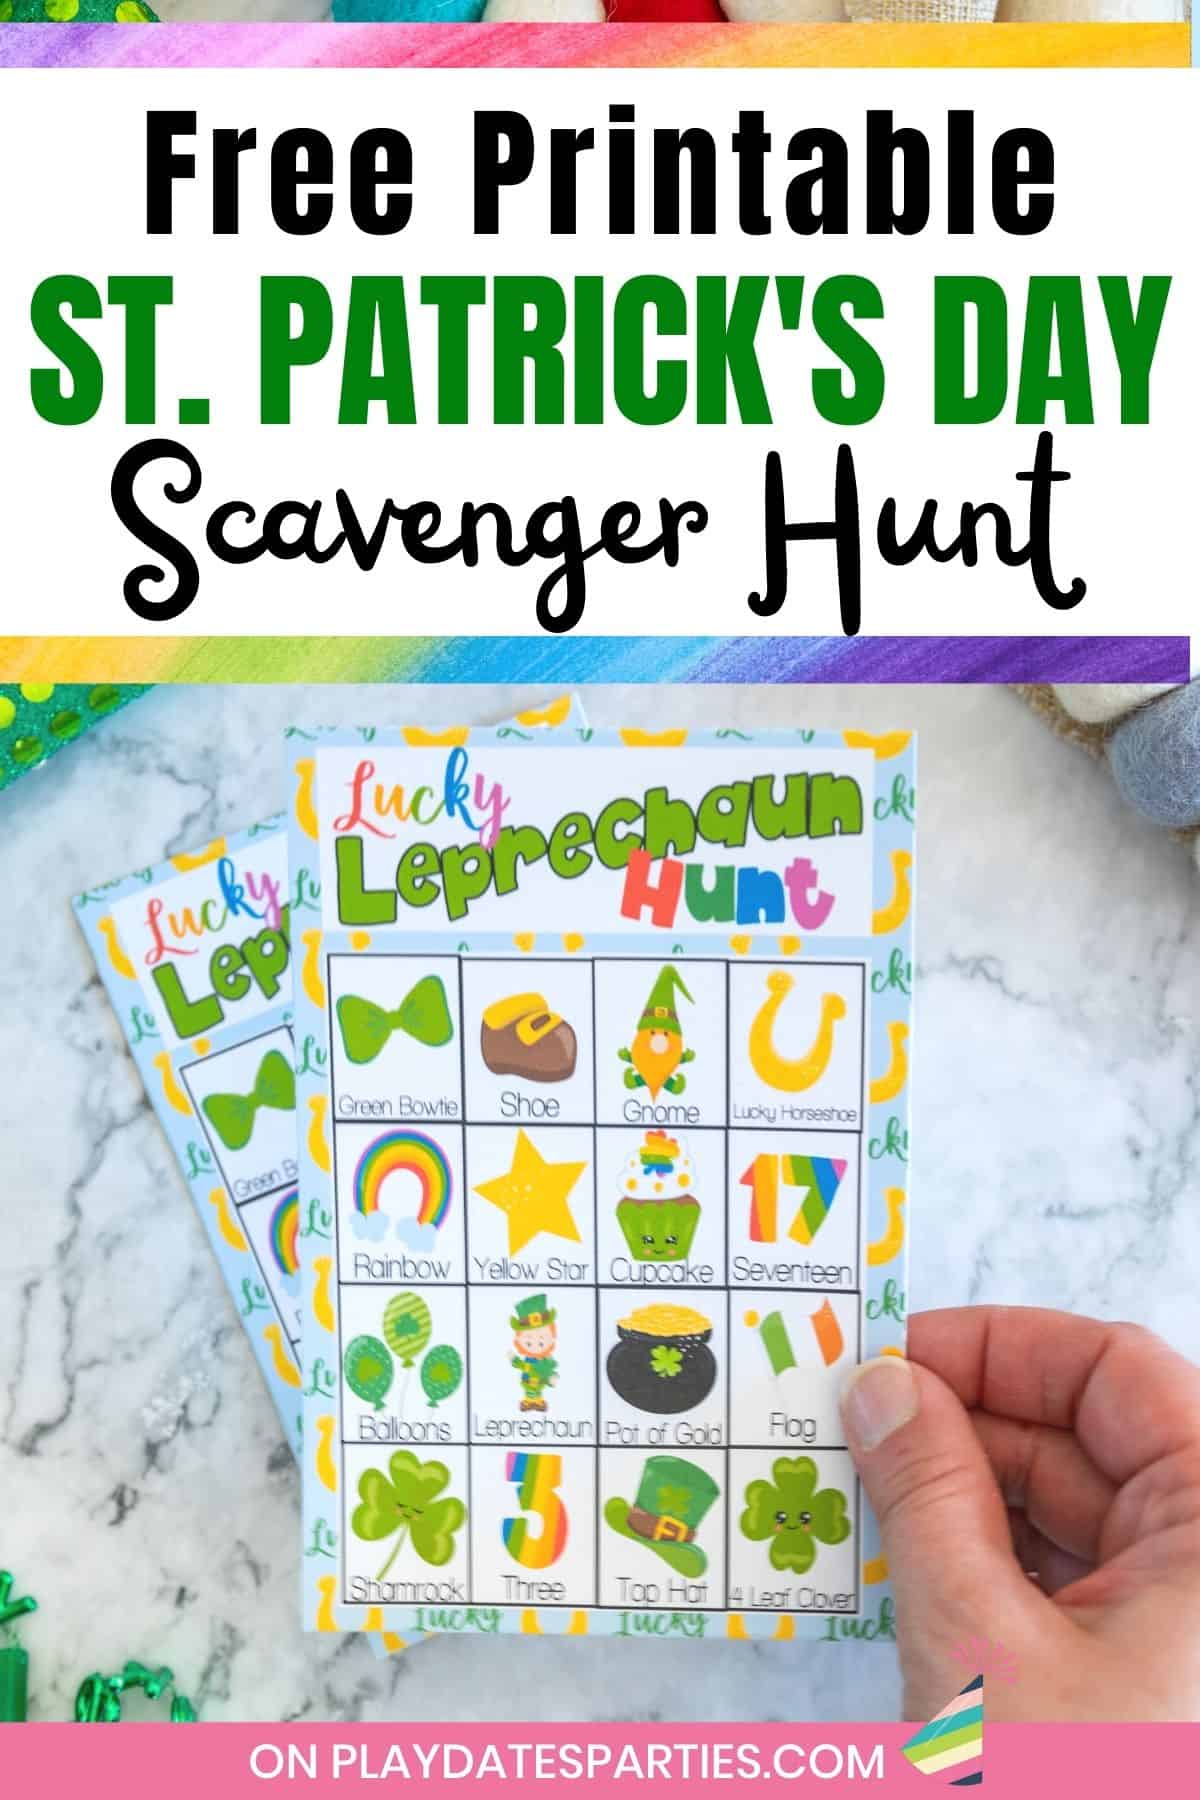 A woman's hand holding a free printable St. Patty's Scavenger hunt card.